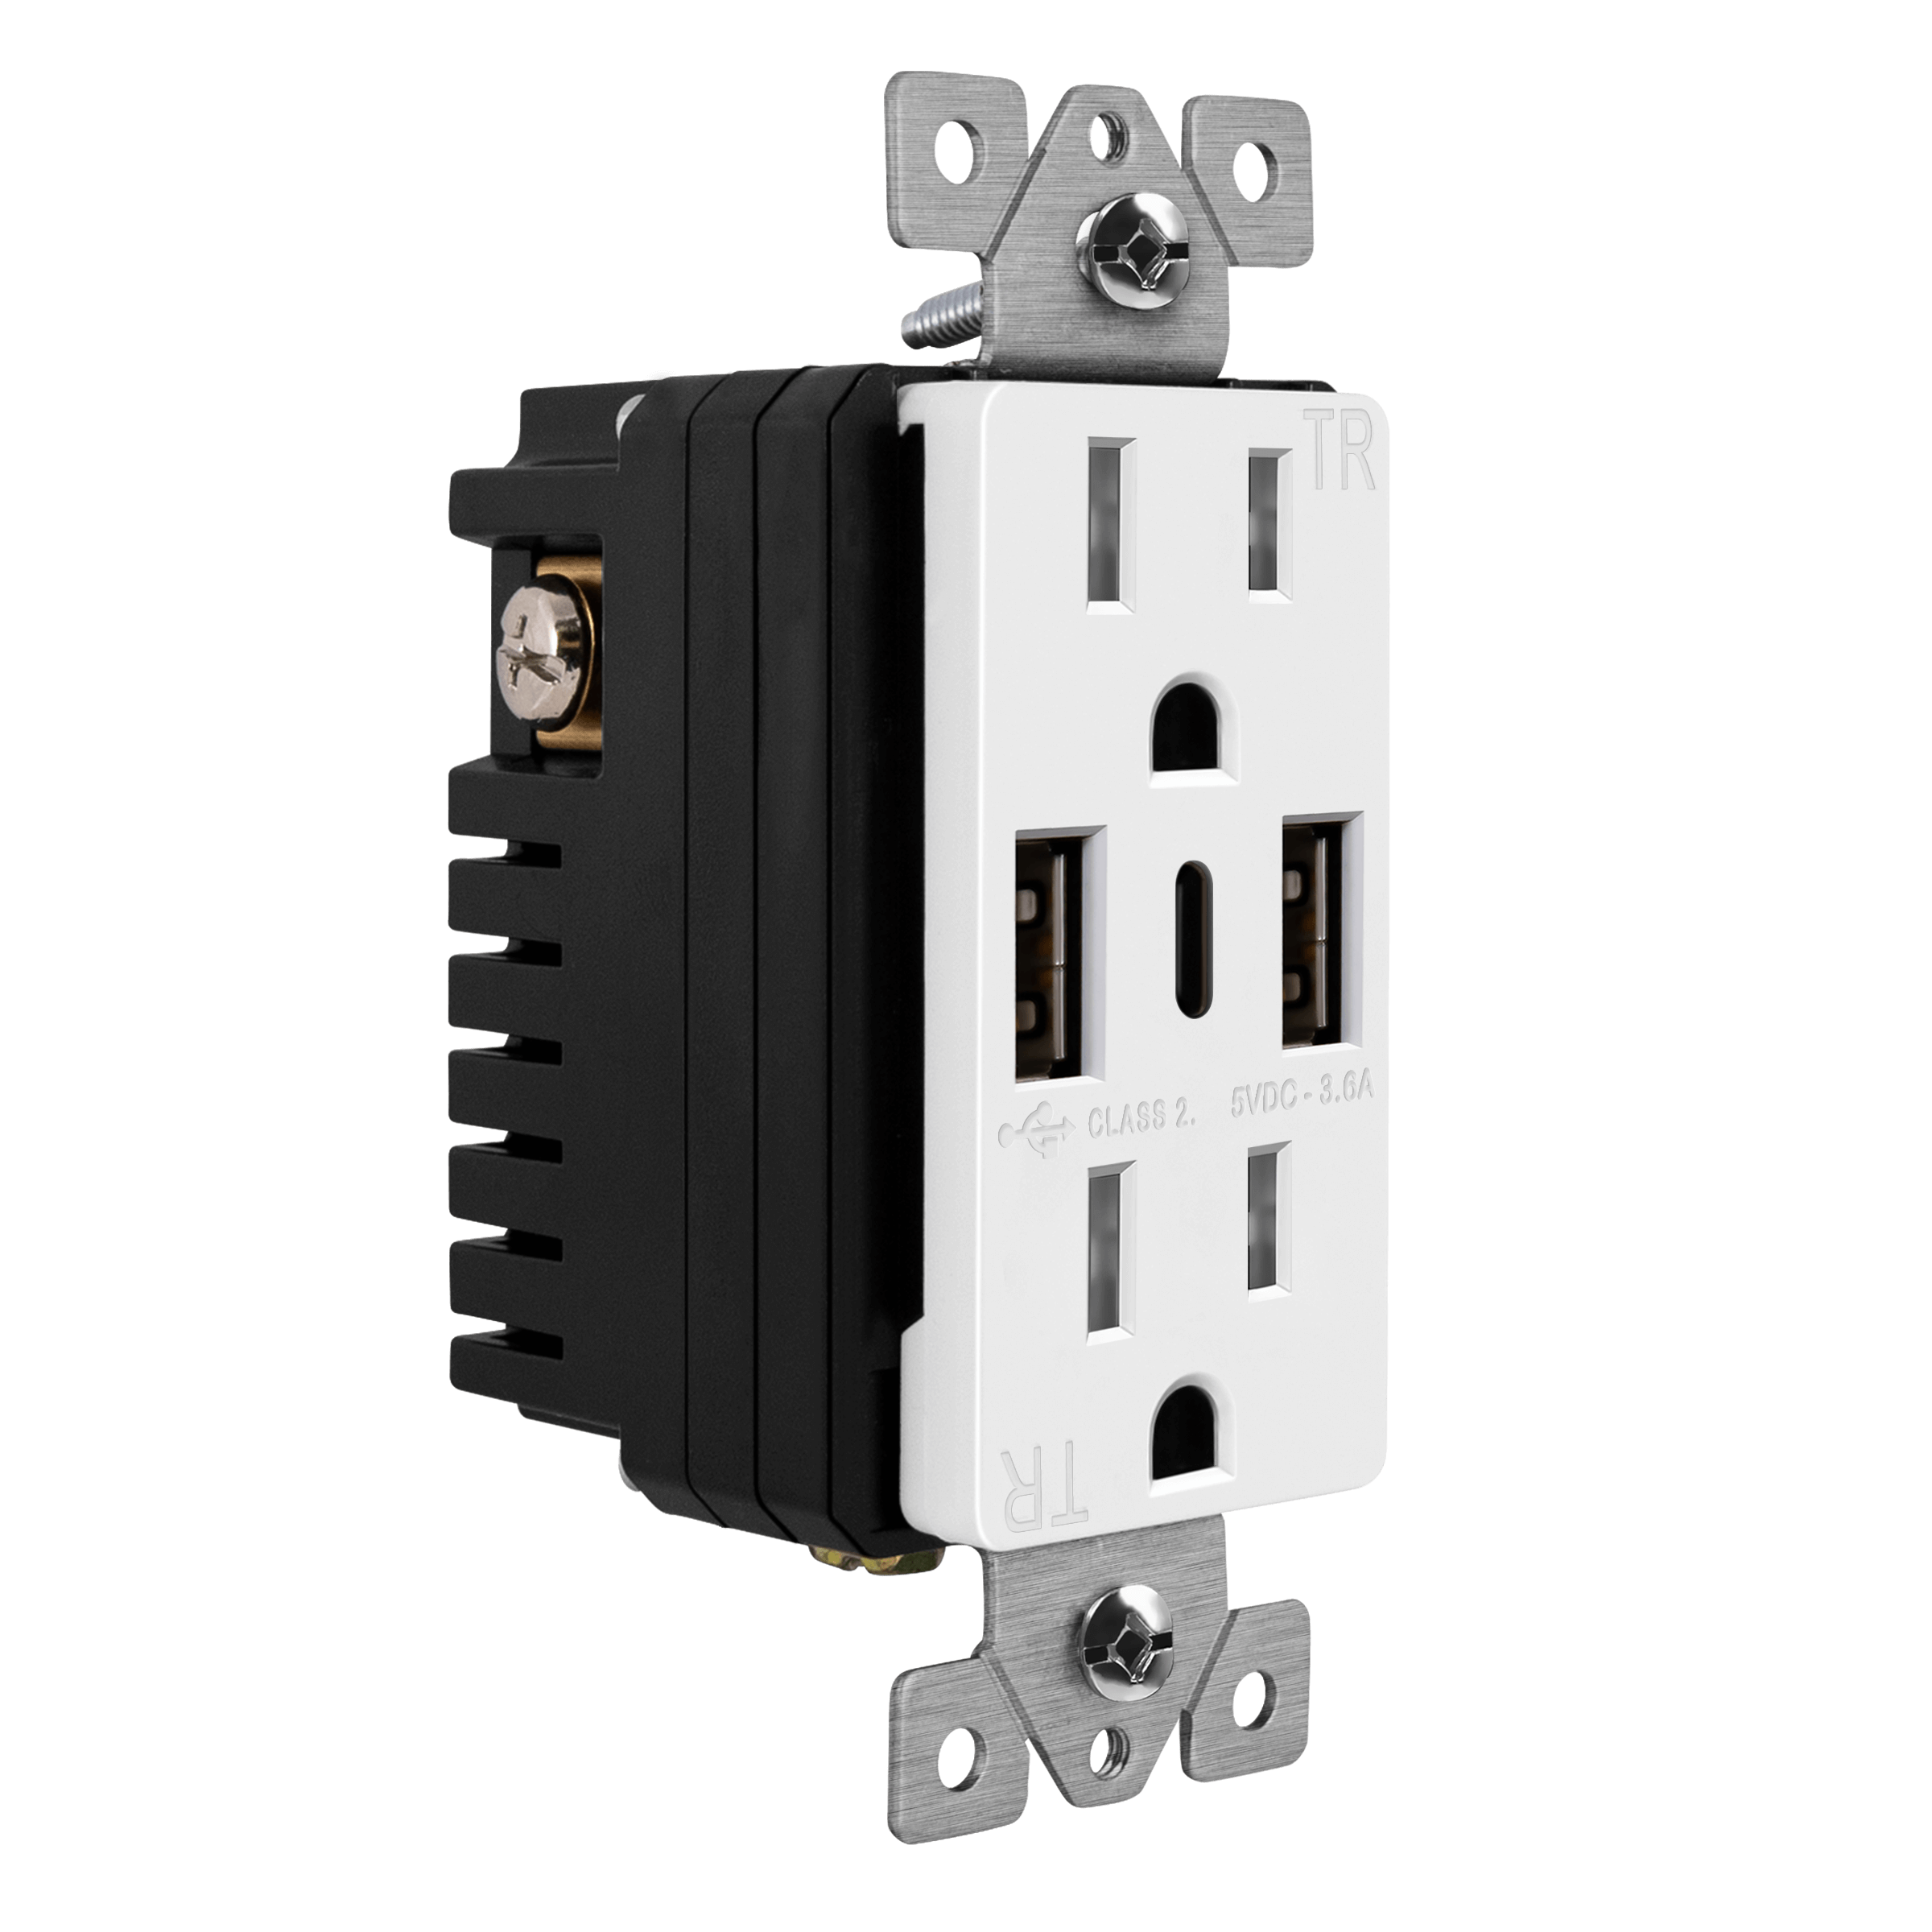 3.6A Triple Port USB-A/C Combo Wall Outlet with 2 USB-A ports